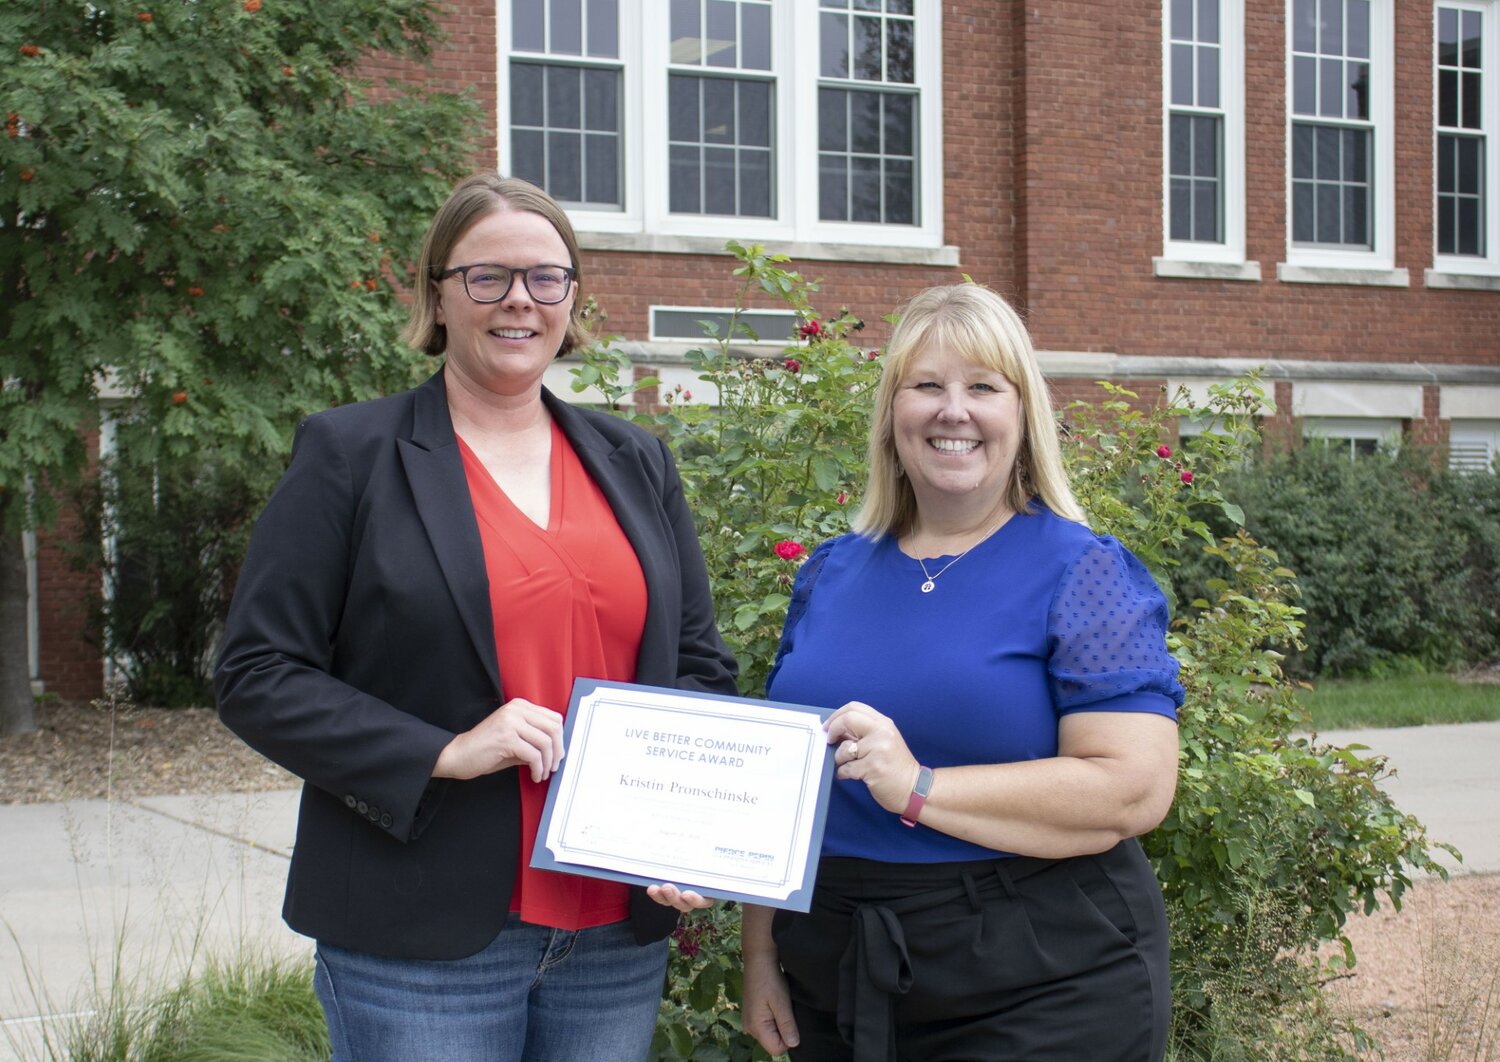 Kristin Pronschinske (left) received the Live Better Community Service Award from Charity Lubich, PPCS vice president of member services and human relations. The award included a certificate of recognition and a $100 MasterCard gift card.